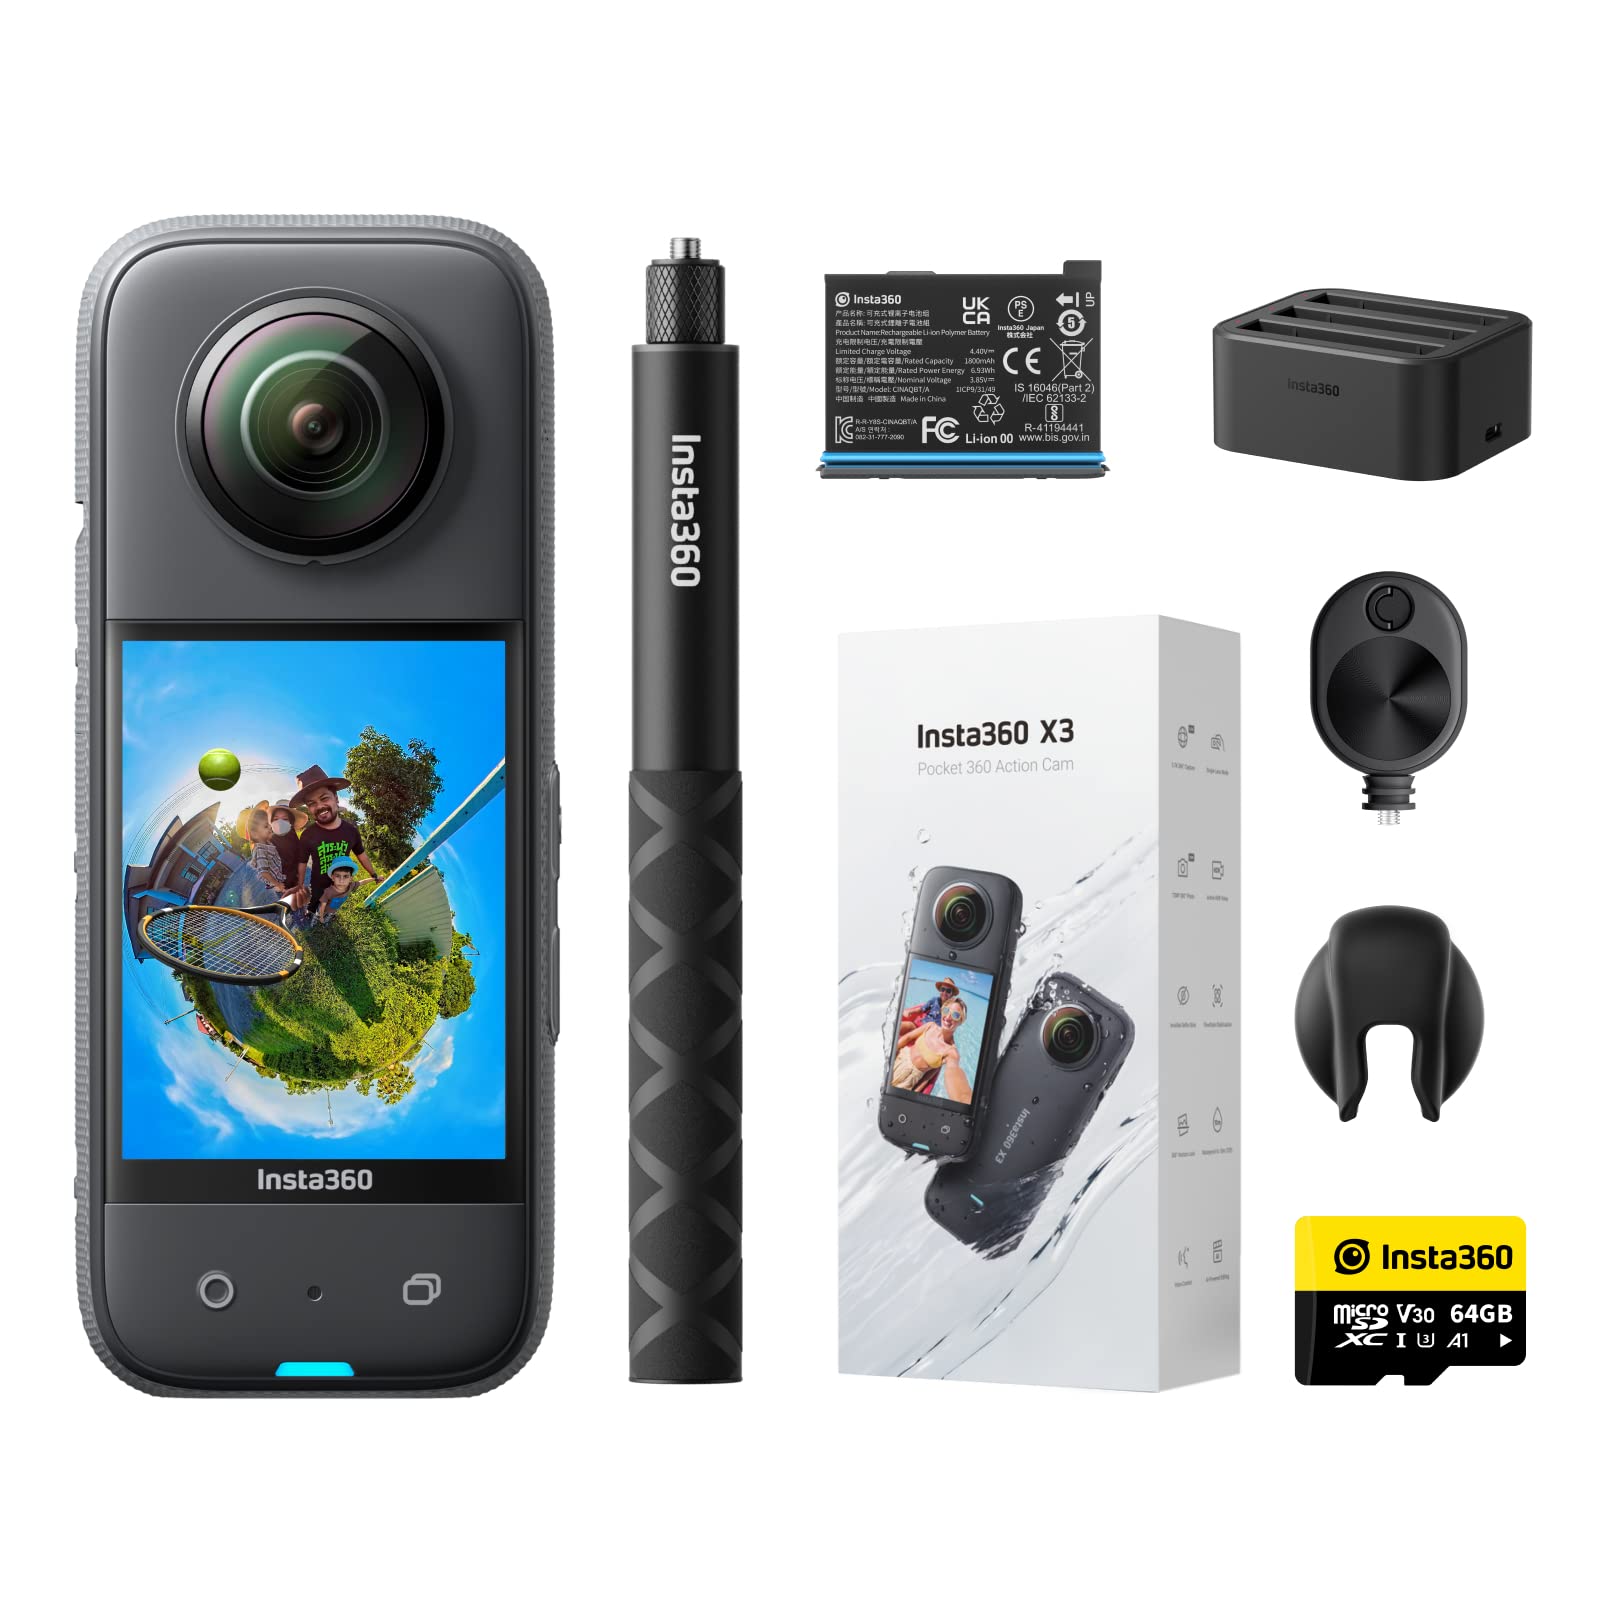 Insta360 X3 Ultimate Kit - 360 Action Camera with 5.7K 360 Active HDR Video, 4K Single-Lens Camera, Waterproof, FlowState Stabil